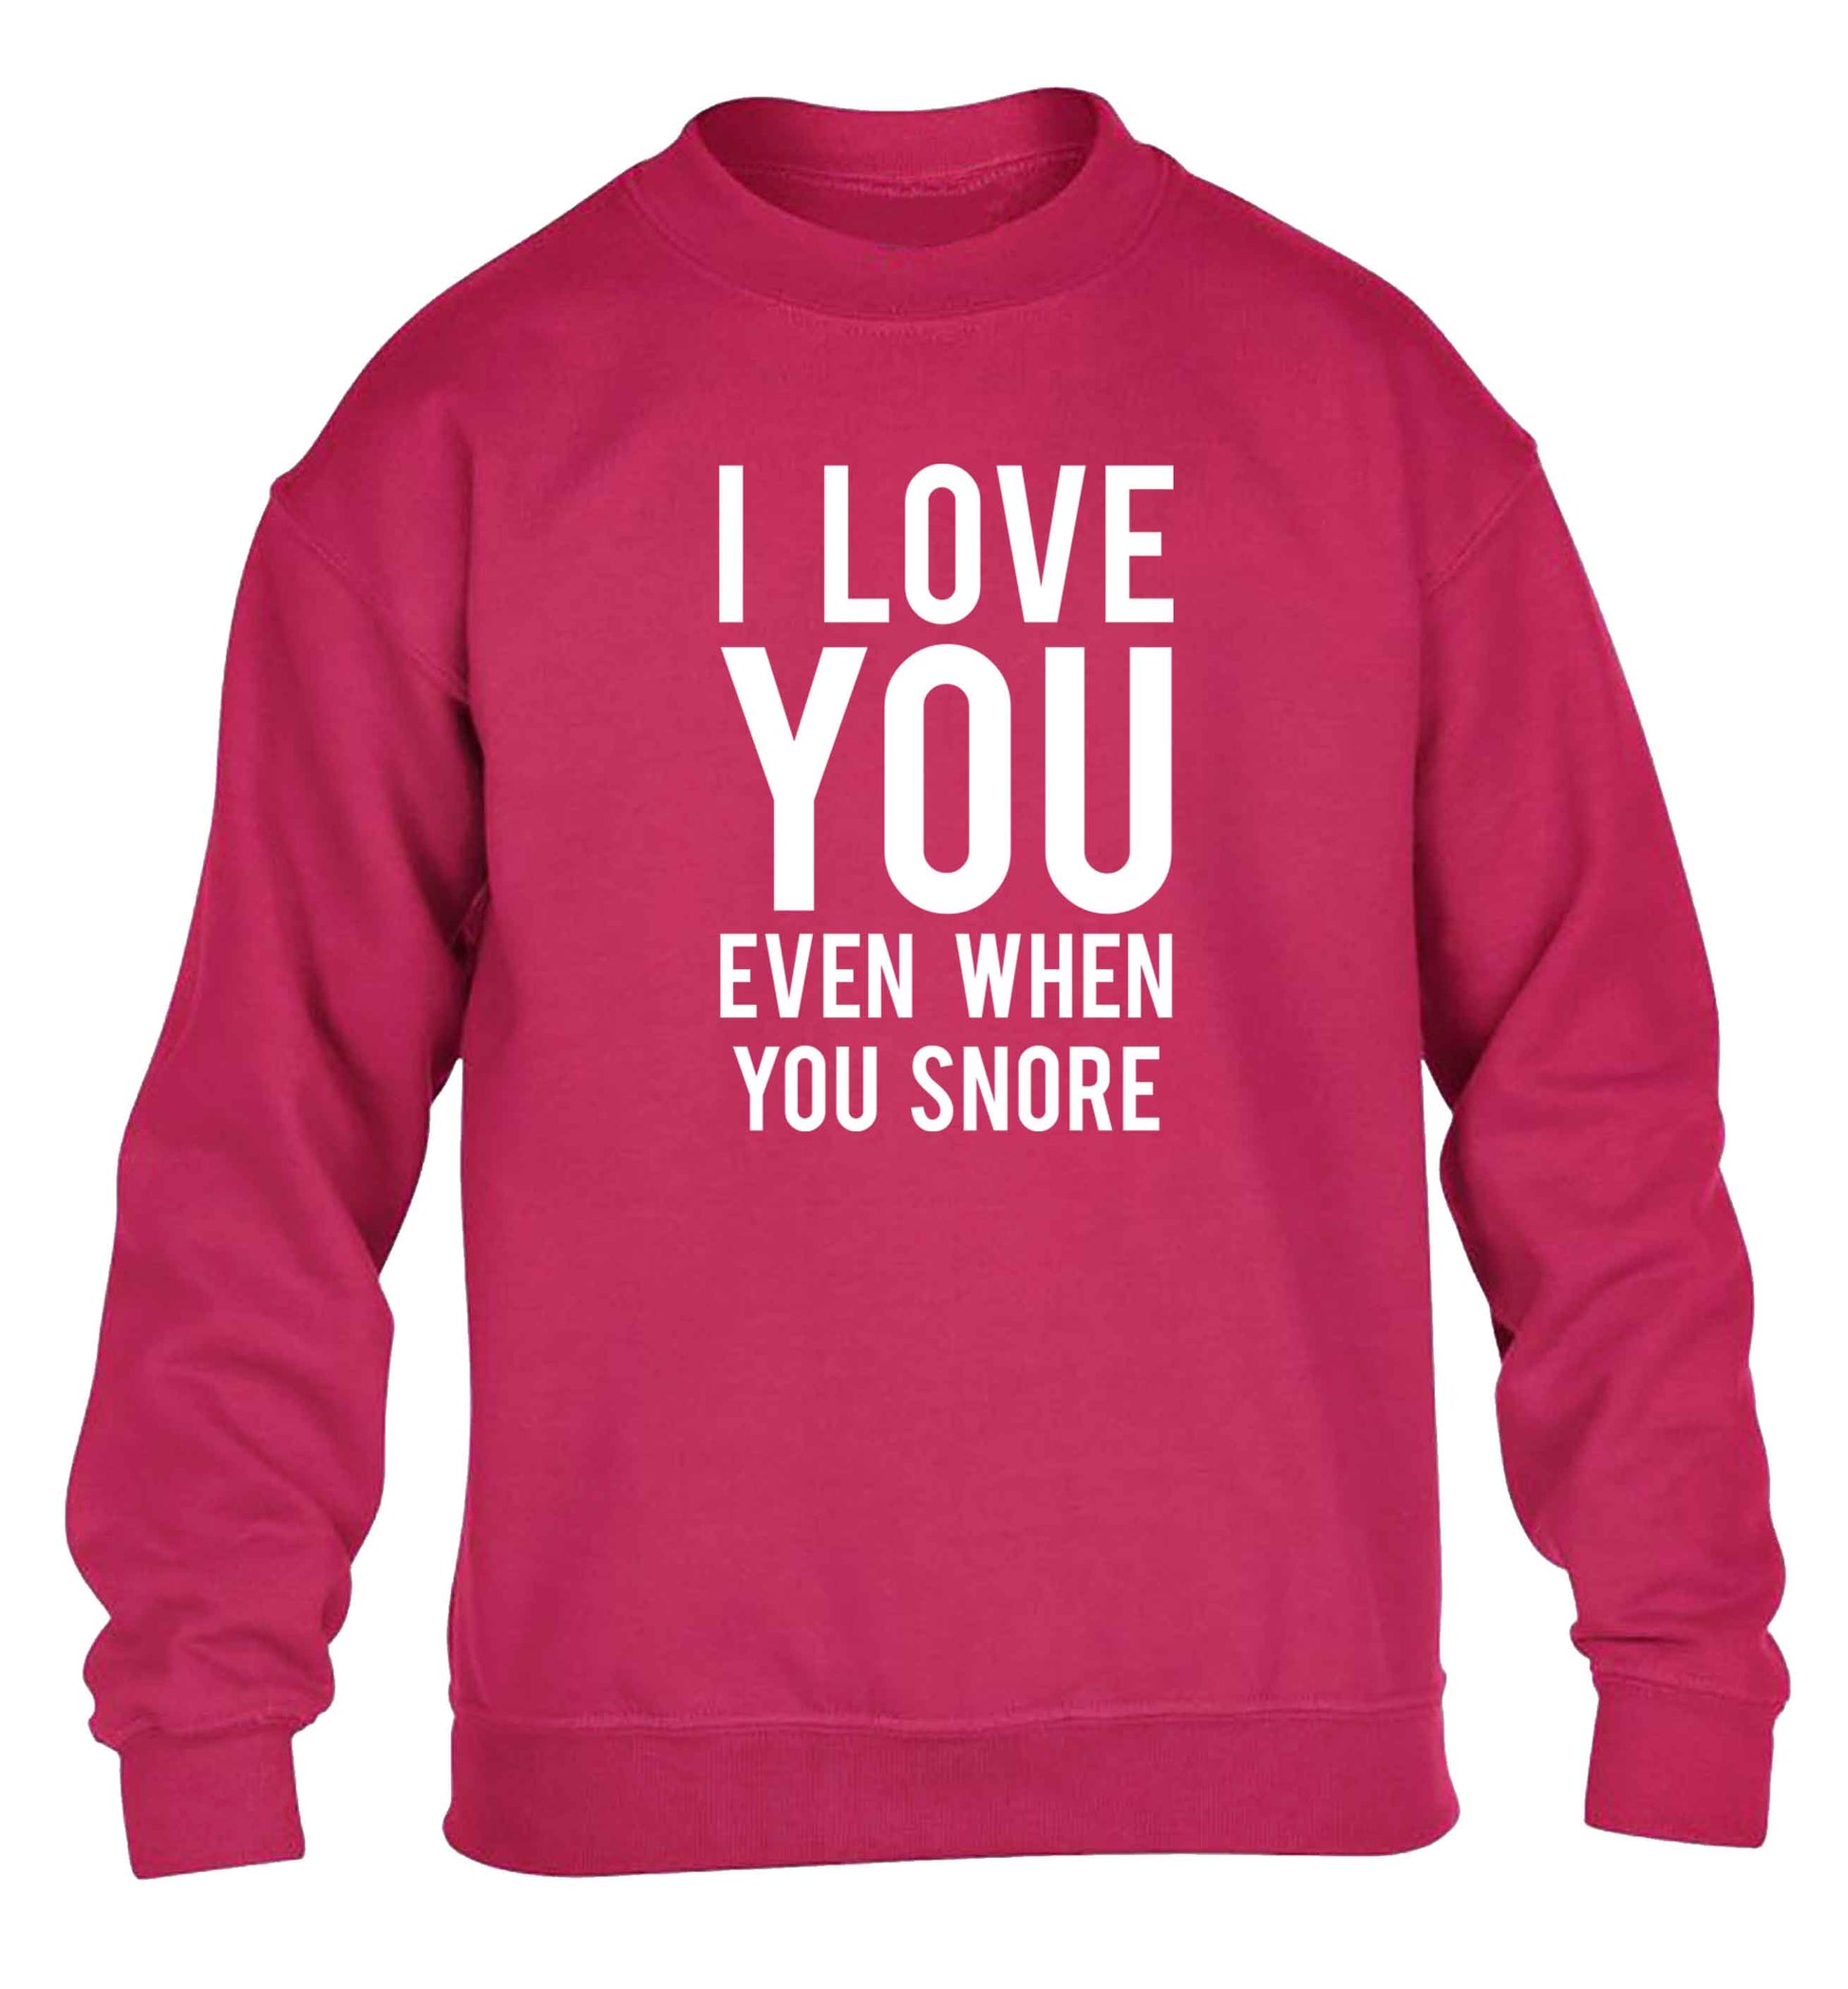 I love you even when you snore children's pink sweater 12-13 Years